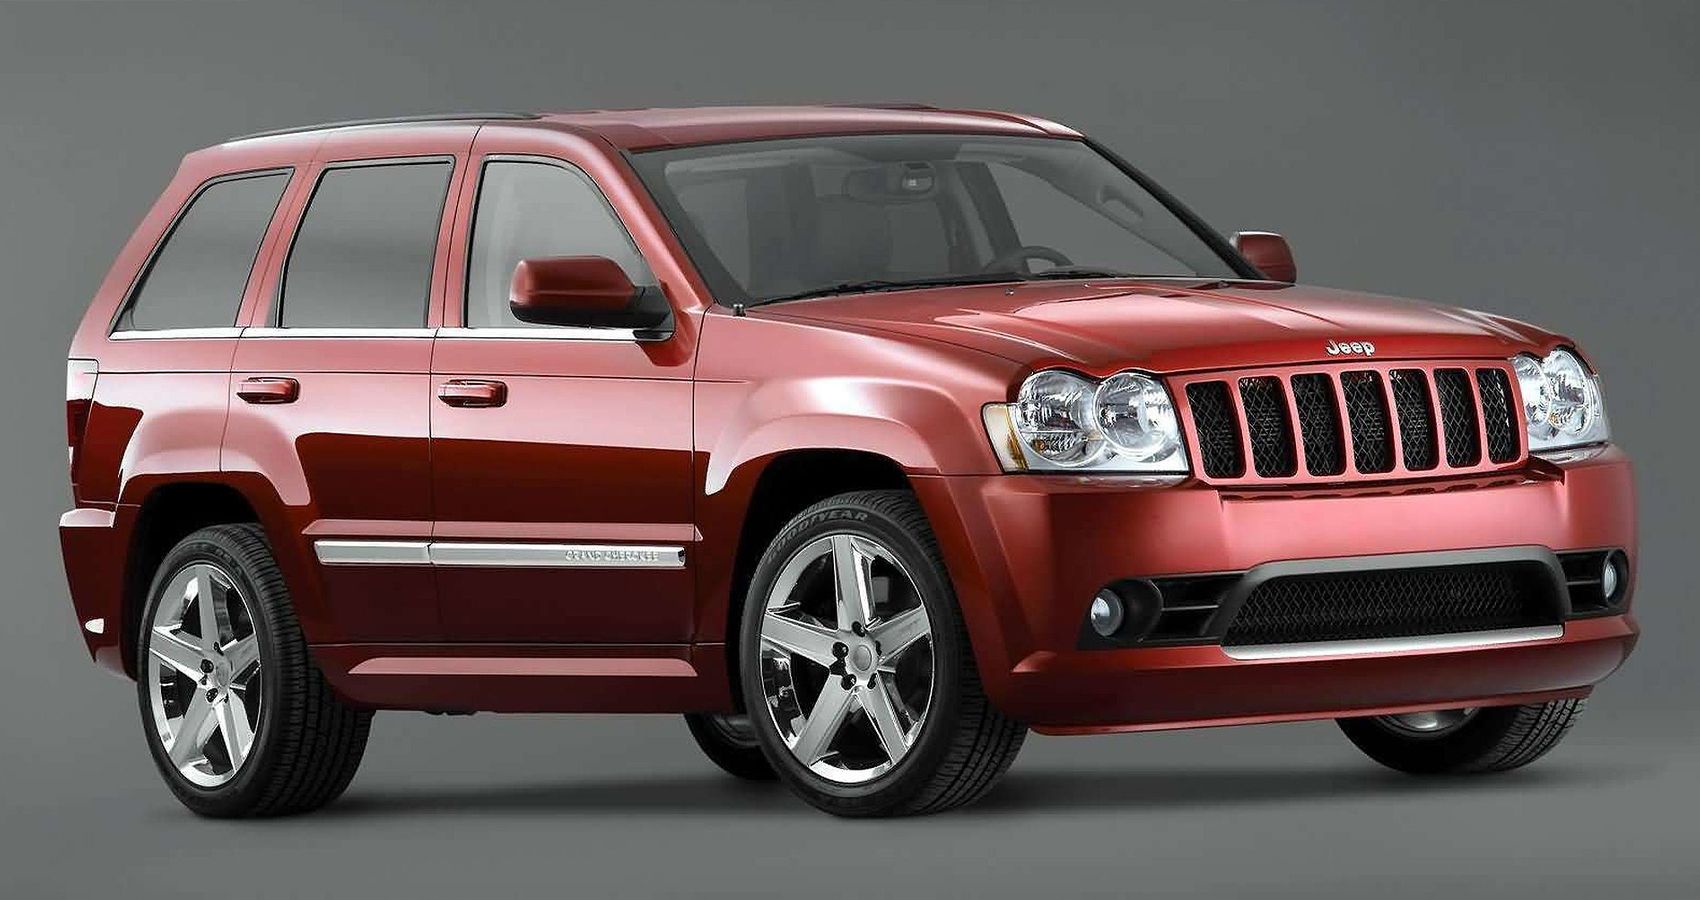 2006 Jeep Grand Cherokee SRT8 in Red